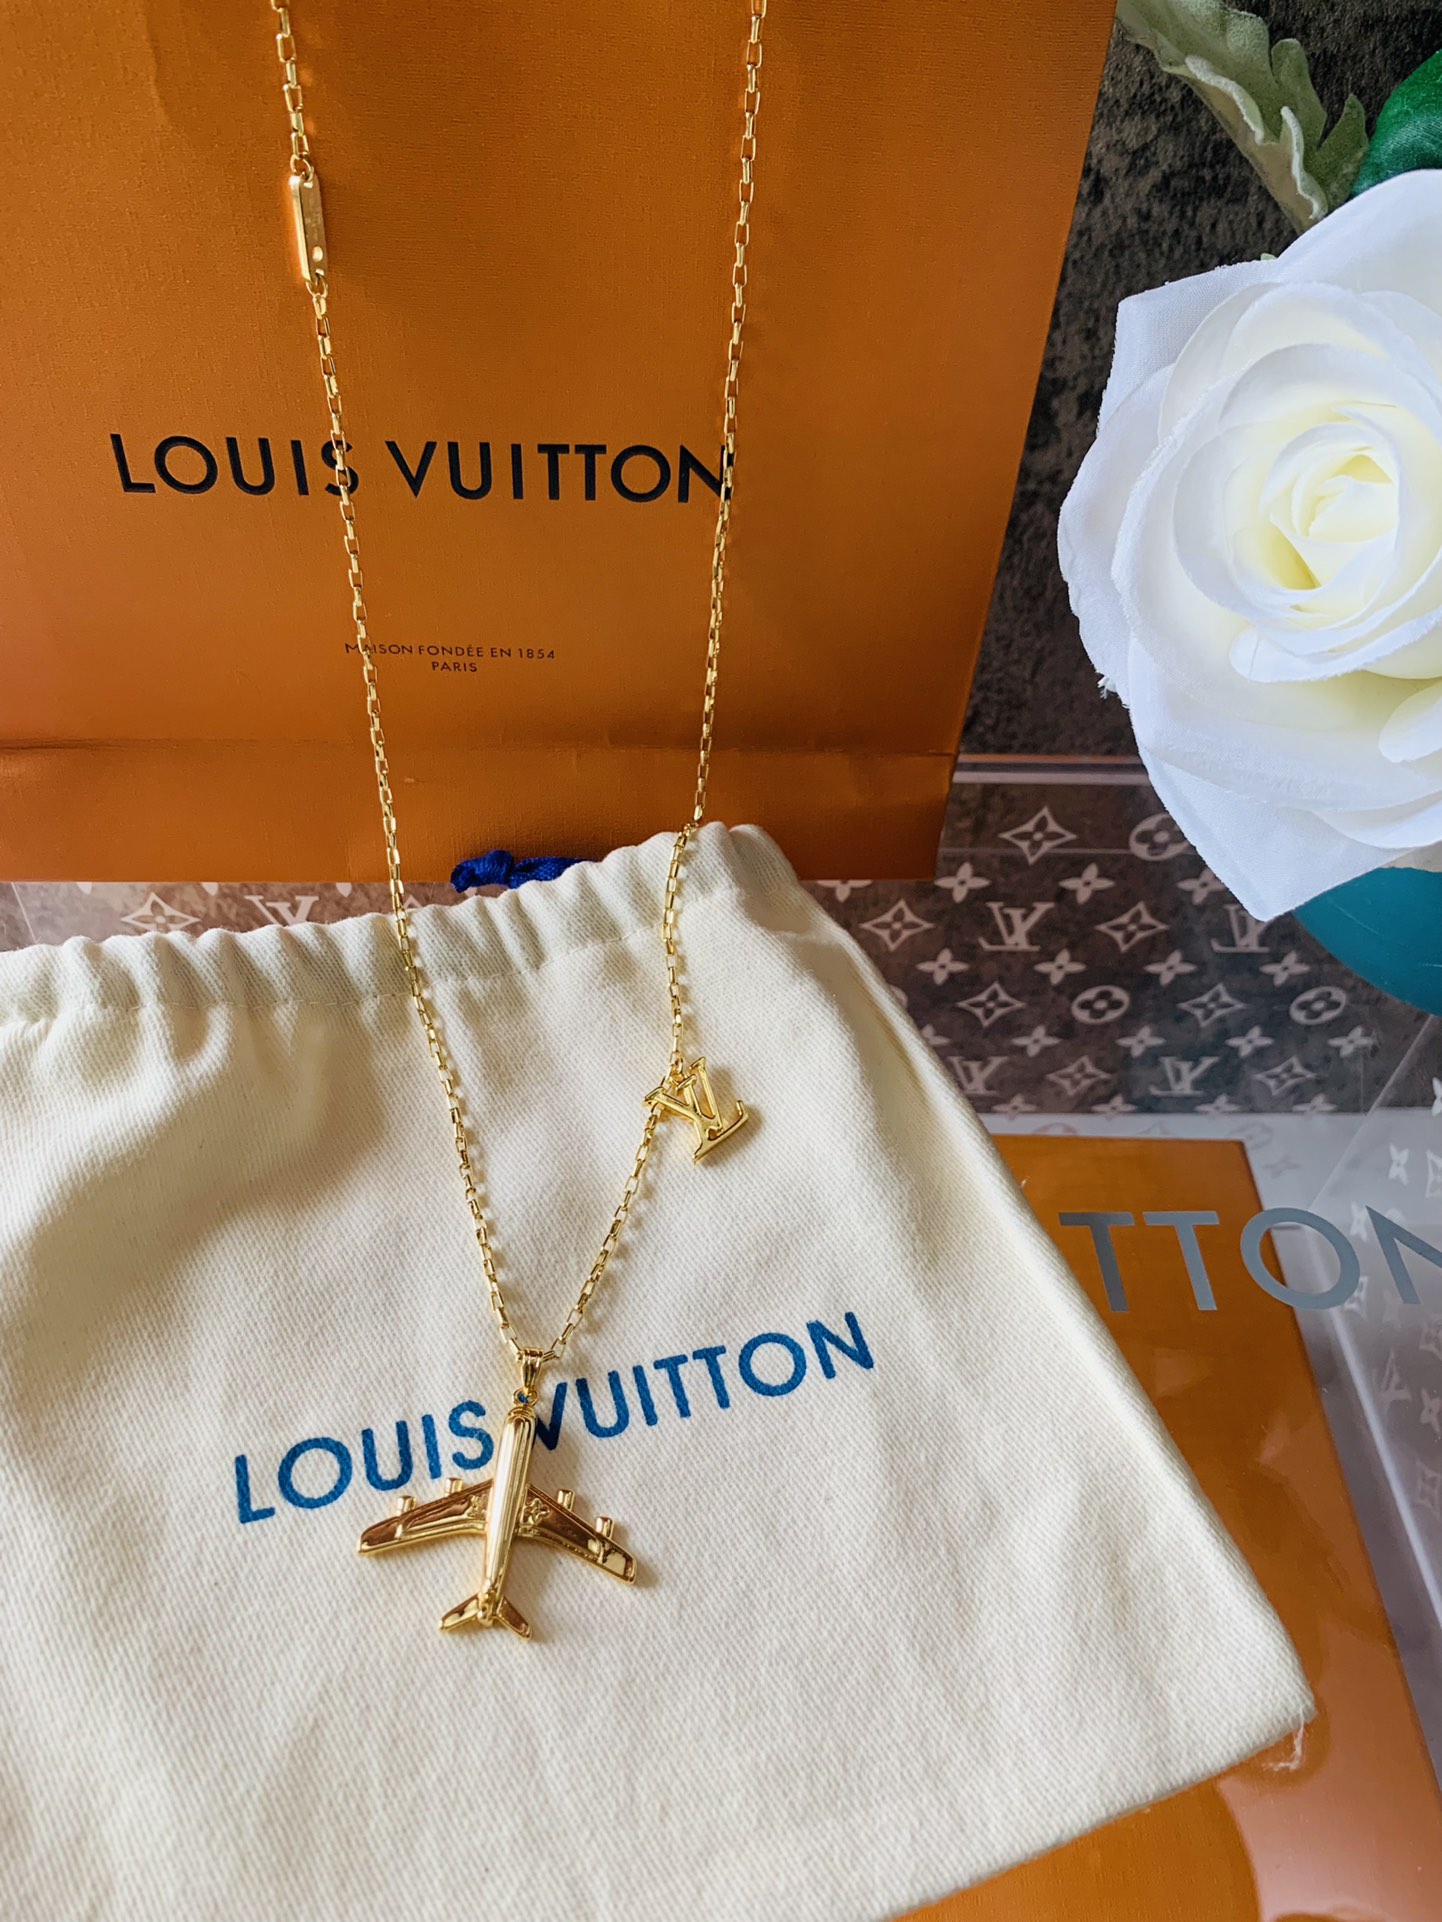 LV airplane necklace/chain from Survivalsource for 135¥ link under